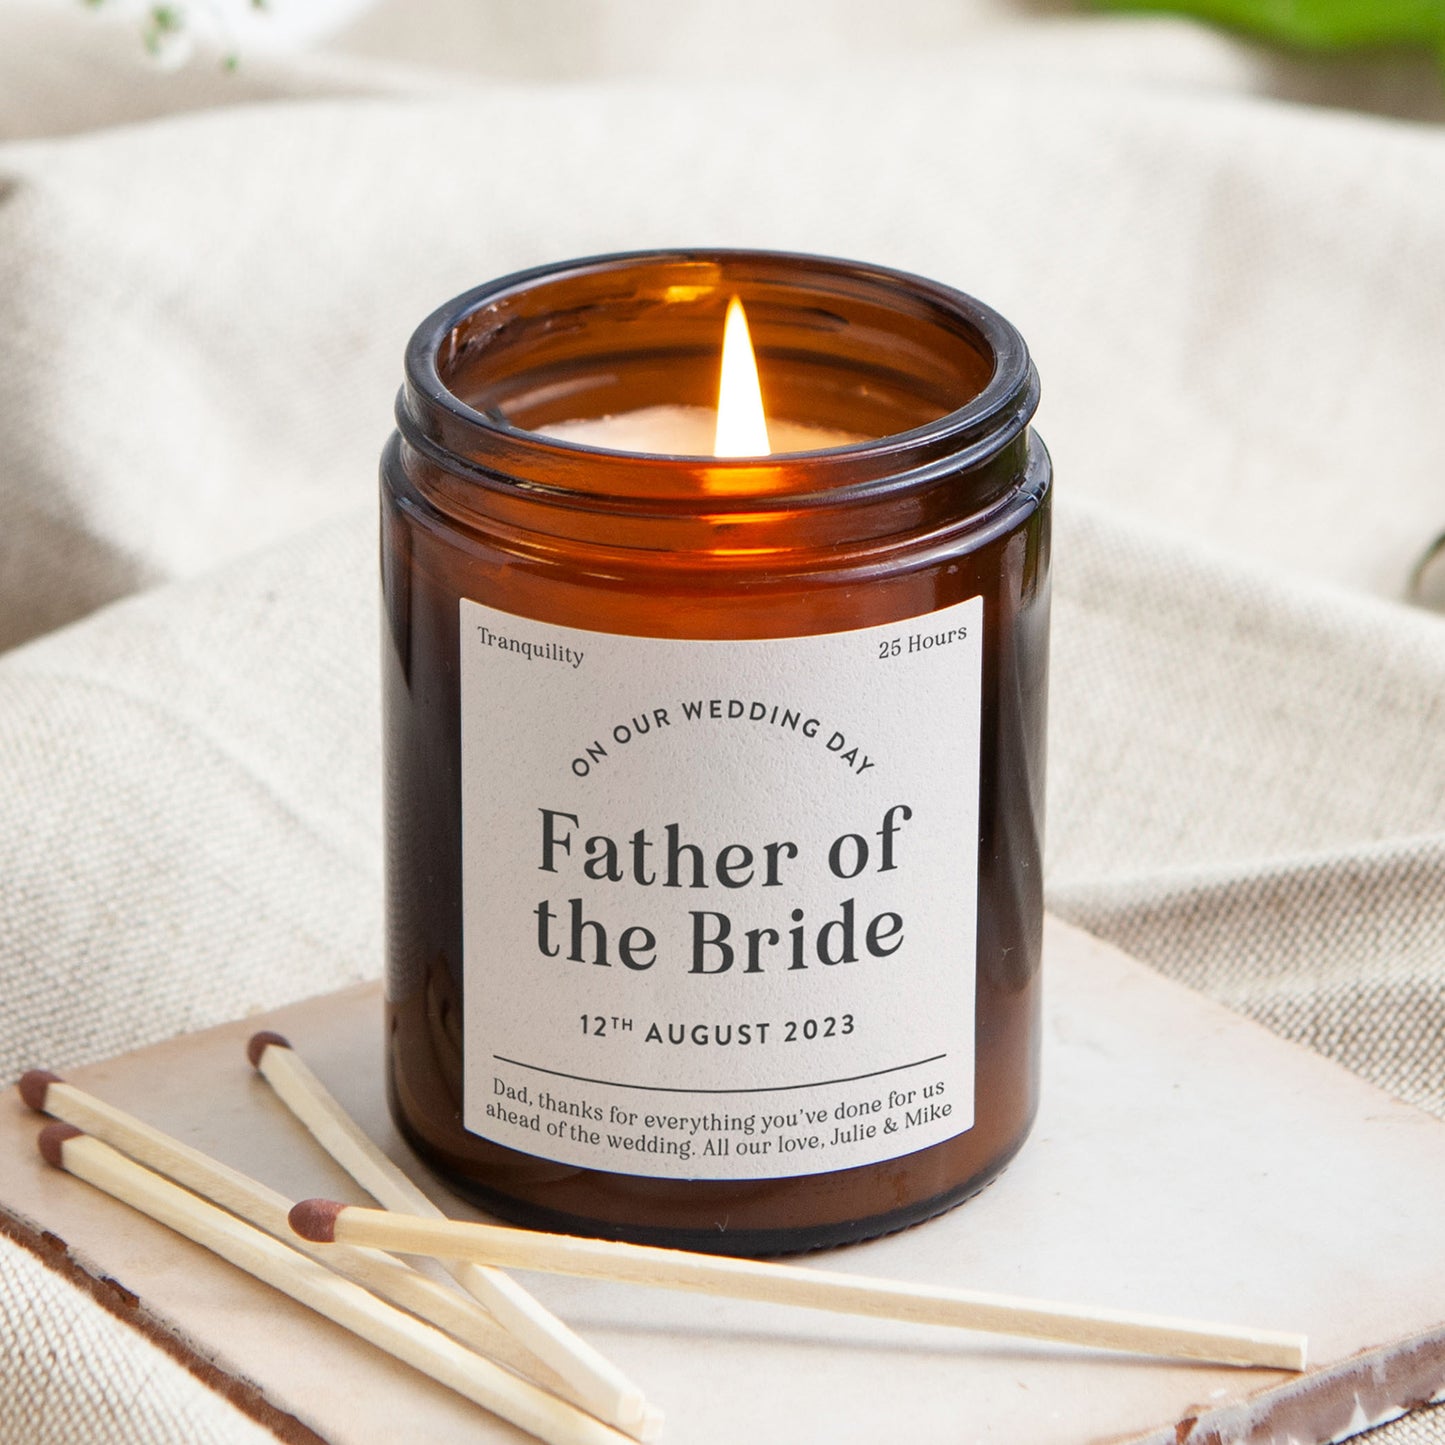 Father of the Bride Gift Keepsake Candle Jar